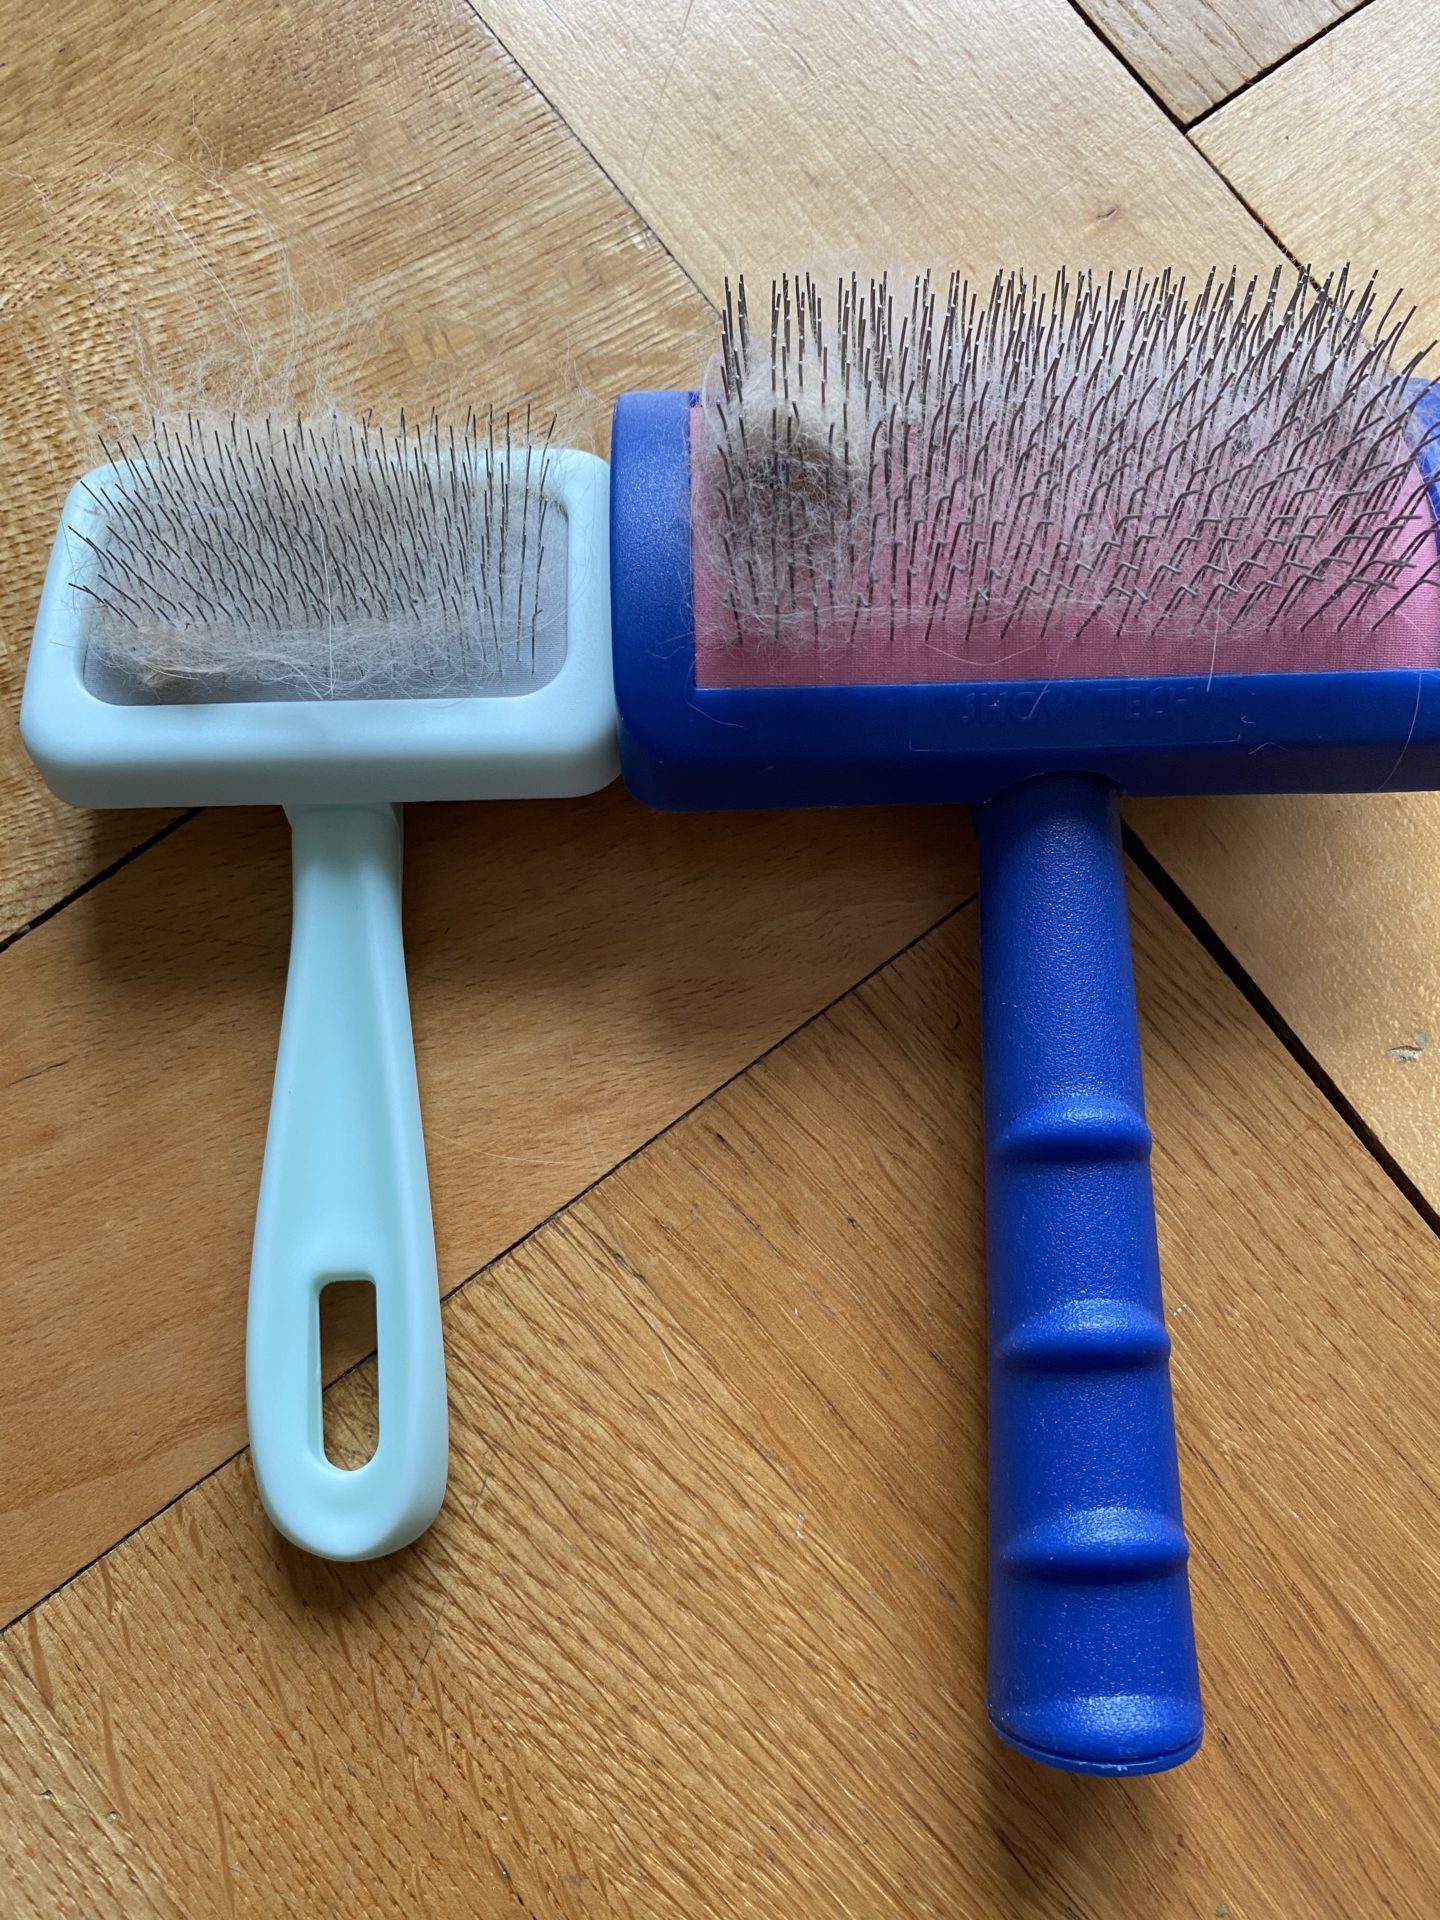 slicker brushes for grooming Persian cats